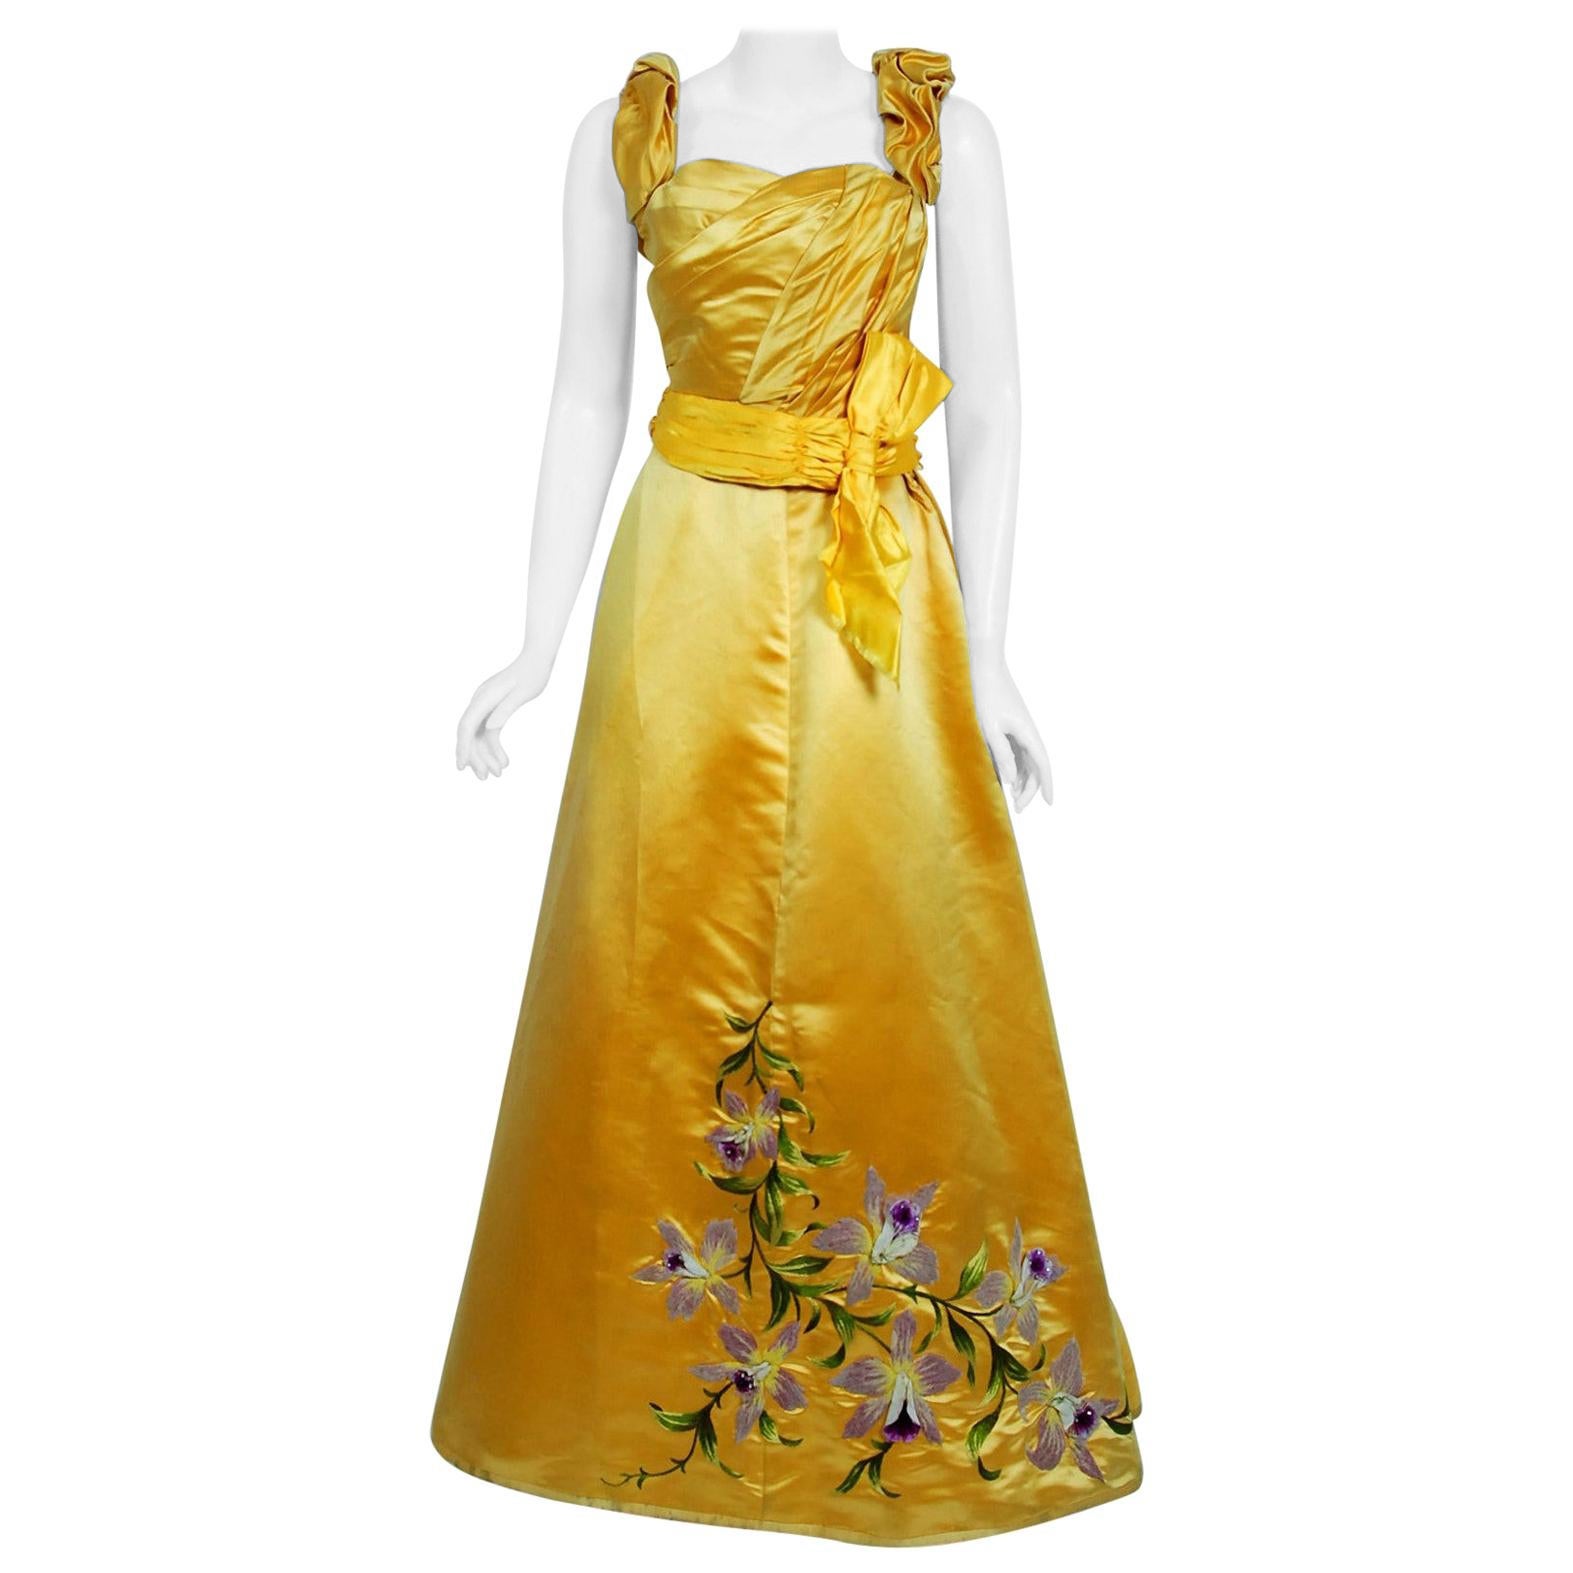 Vintage 1890's Victorian French Couture Floral Embroidered Yellow Satin Gown For Sale